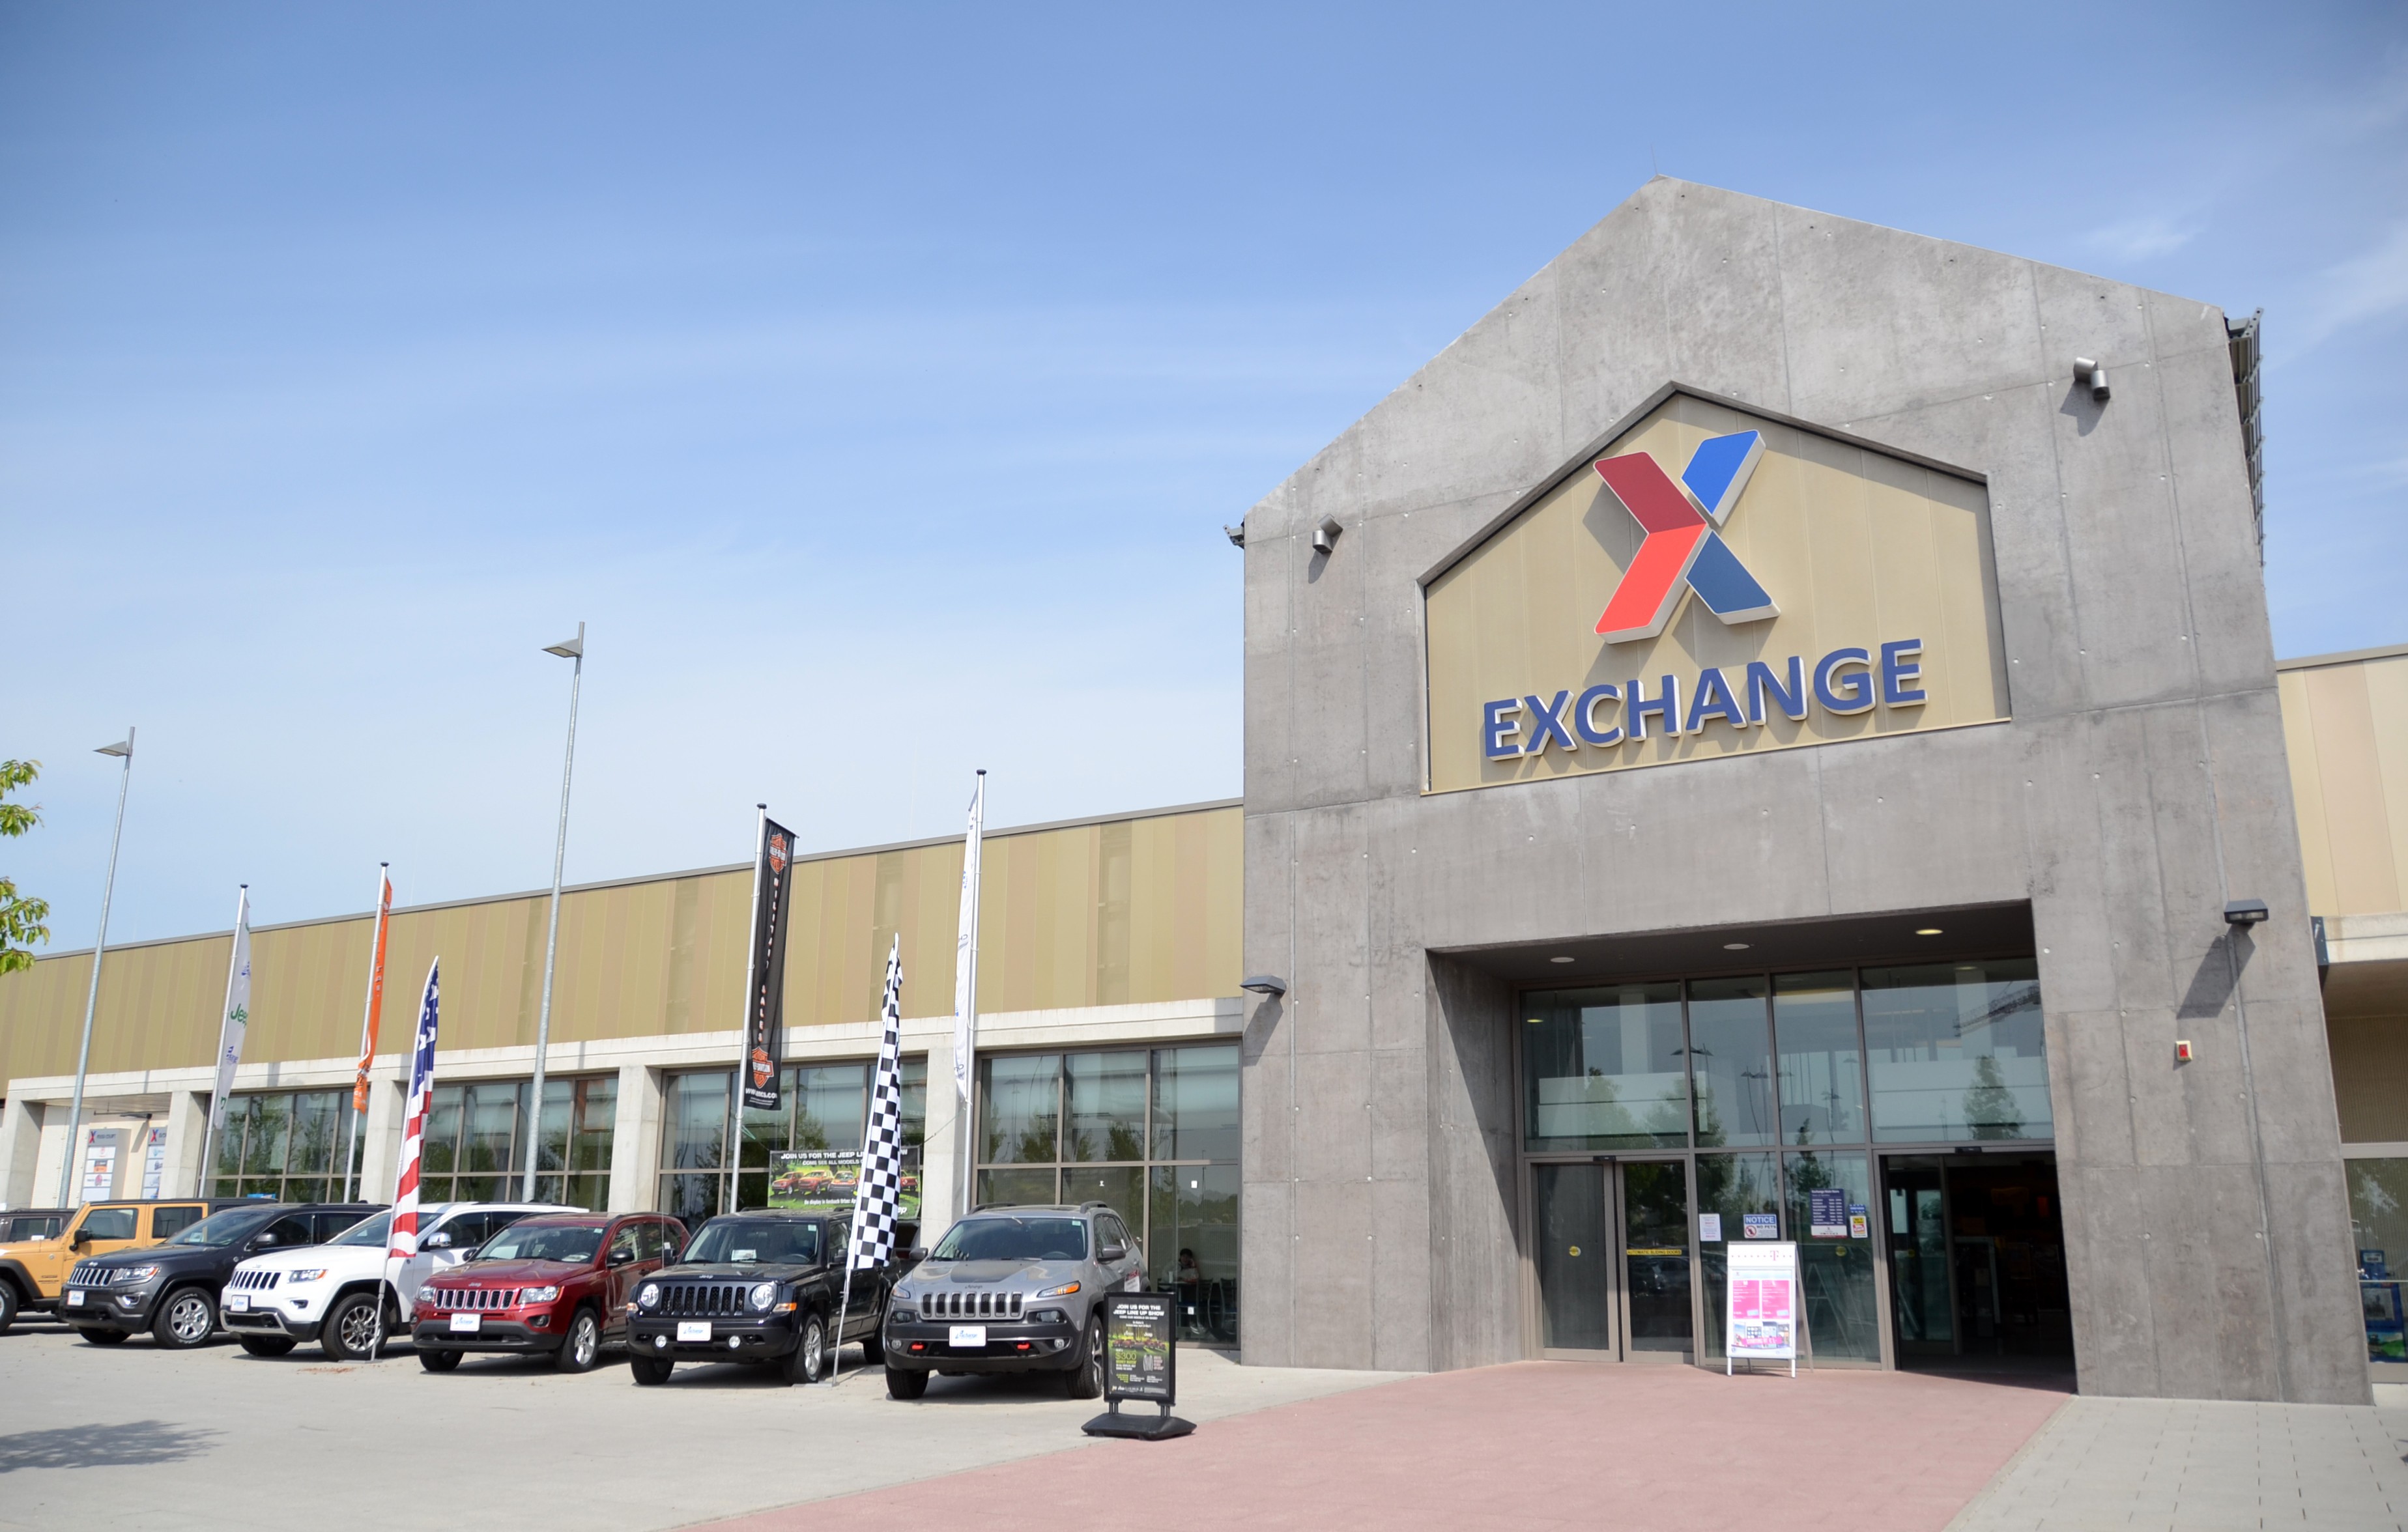 Aafes Re-evaluates Closure Of Some Facilities At Ansbach Plans Reduced Hours Article The United States Army